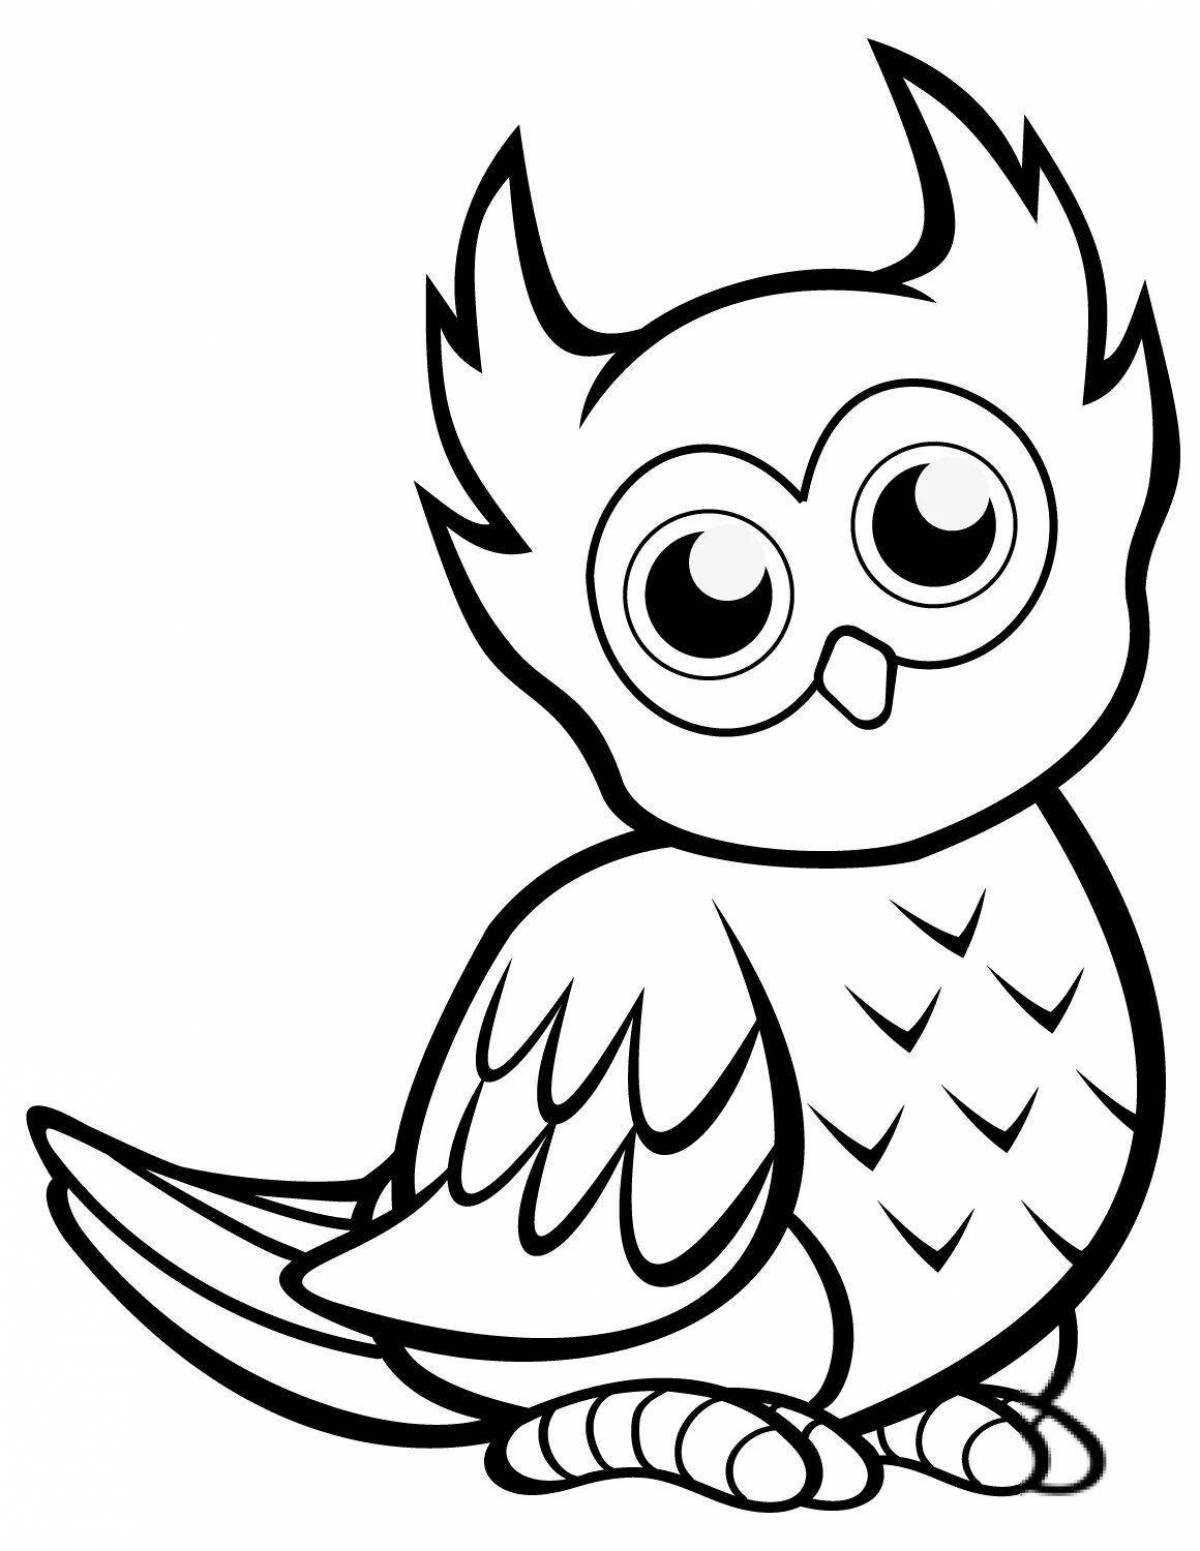 Coloring book funny cute owl